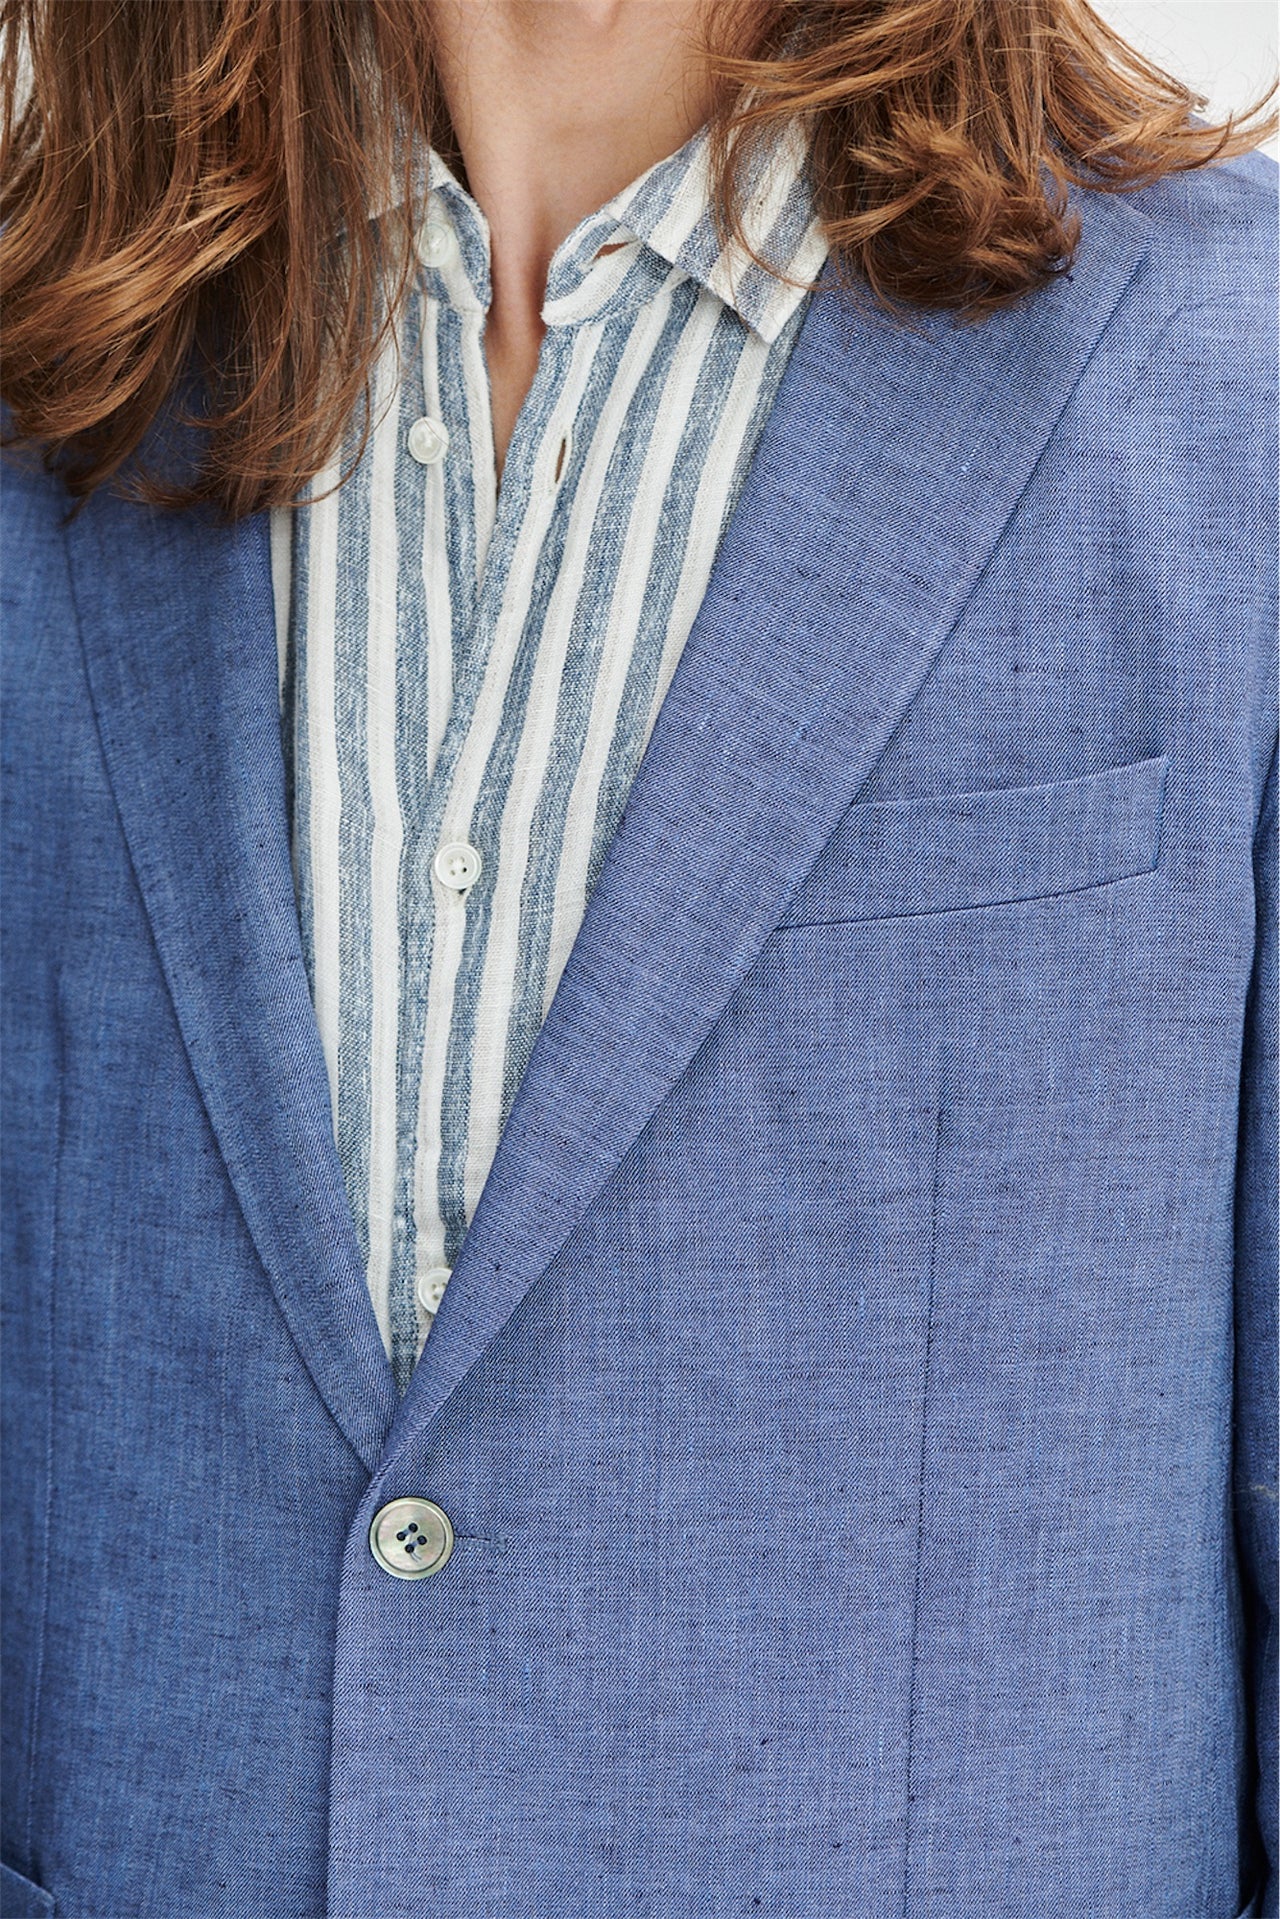 Smart Relaxed Blazer in a natural stretch navy and pilot blue Italian traceable linen